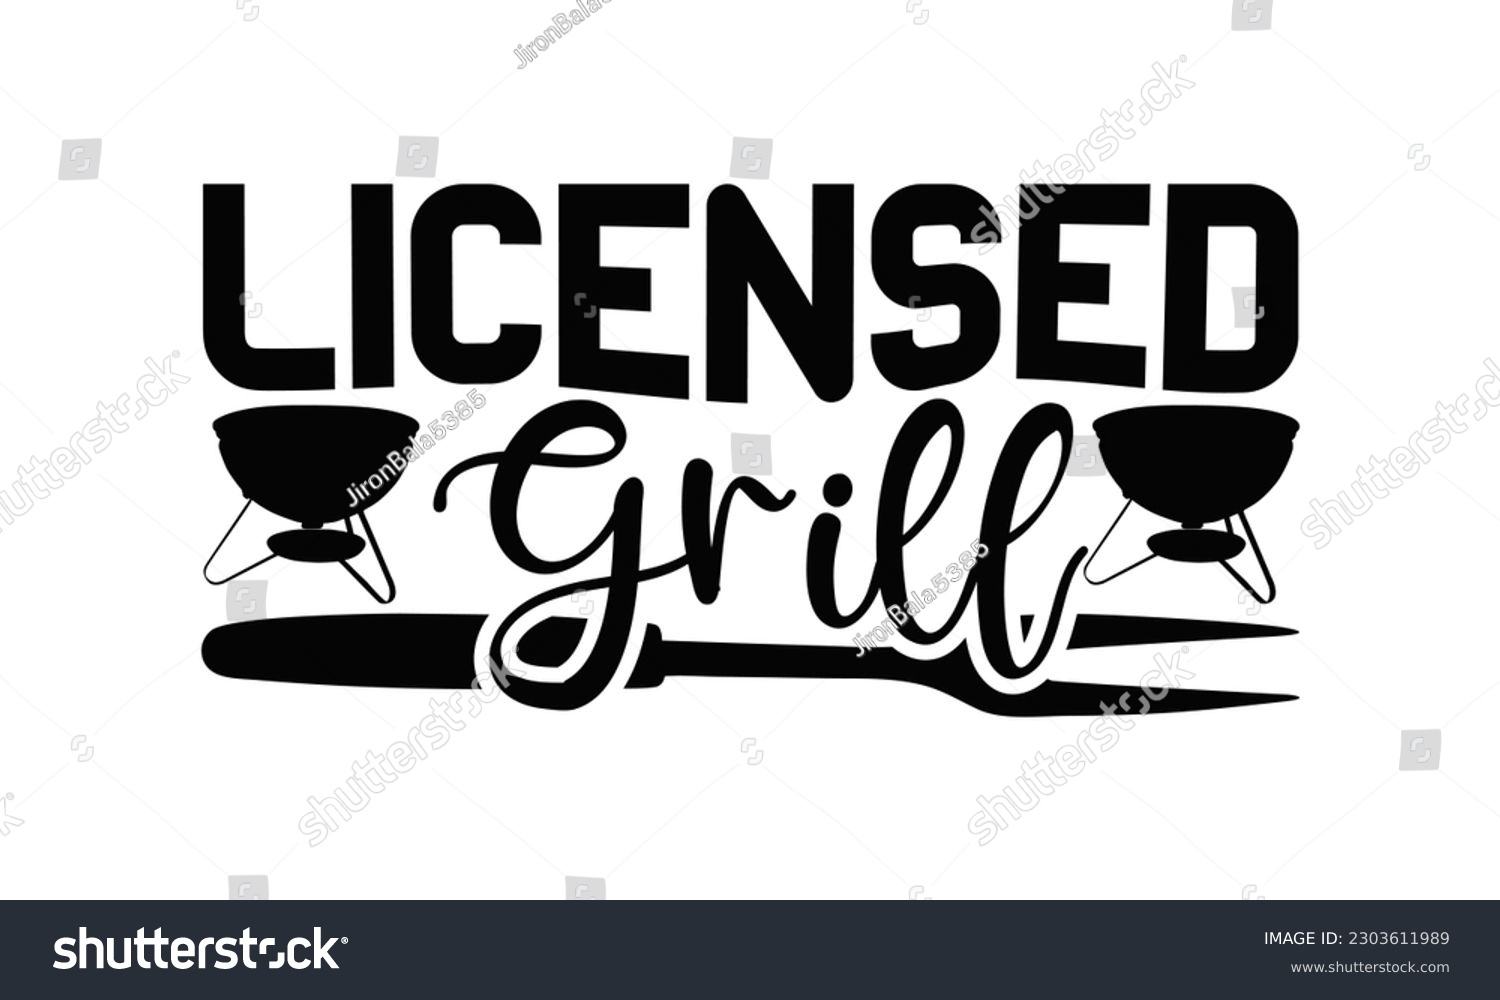 SVG of Licensed Grill - Barbecue SVG Design, Calligraphy t shirt design, Illustration for prints on t-shirts, bags, posters, cards and Mug.
 svg